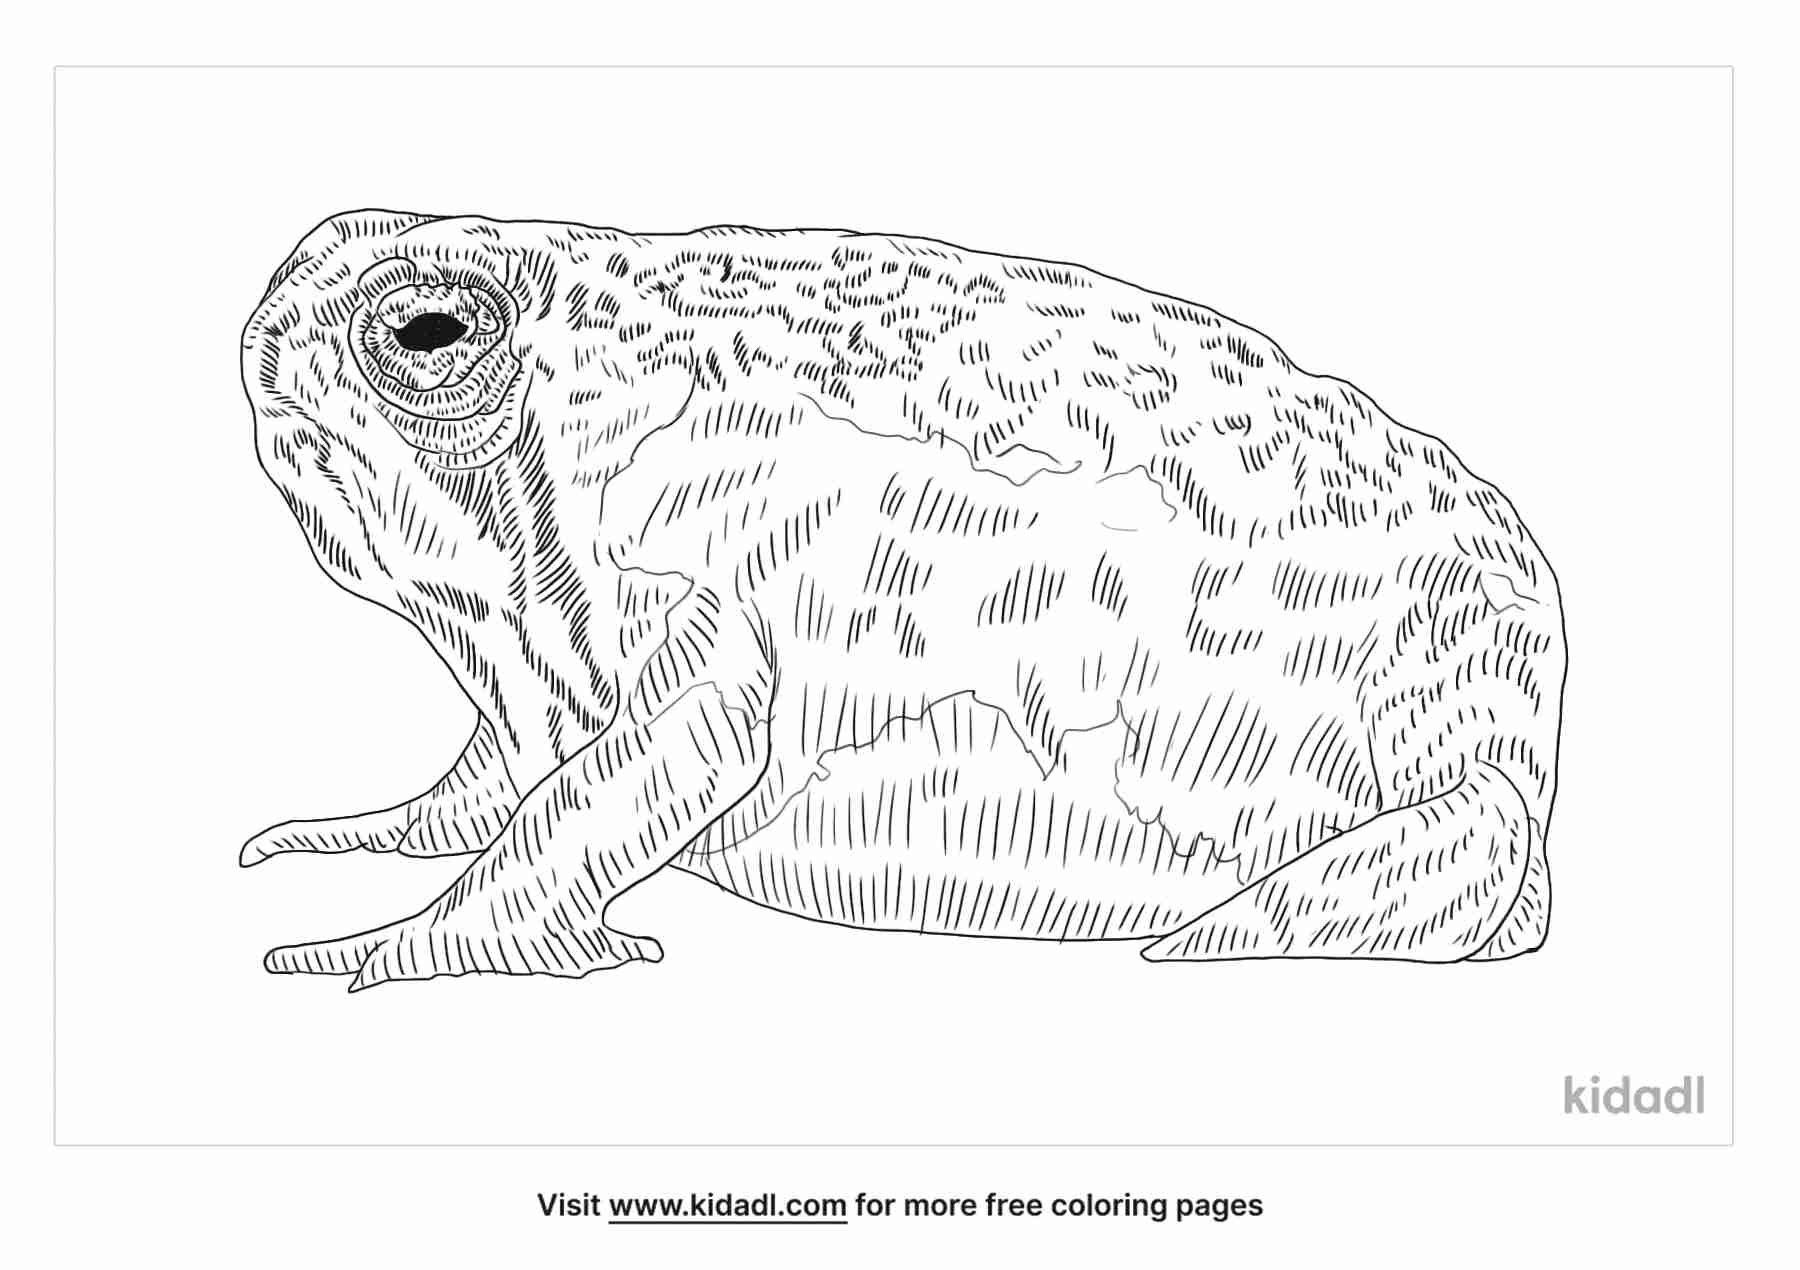 about the flat faced frog species